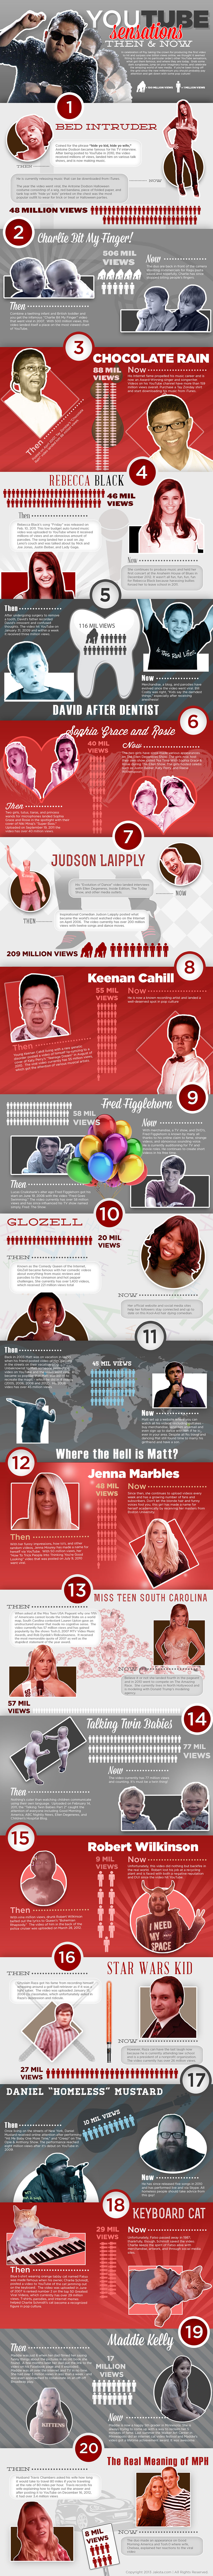 YouTube Sensations: Where Are They Now? [Infographic]